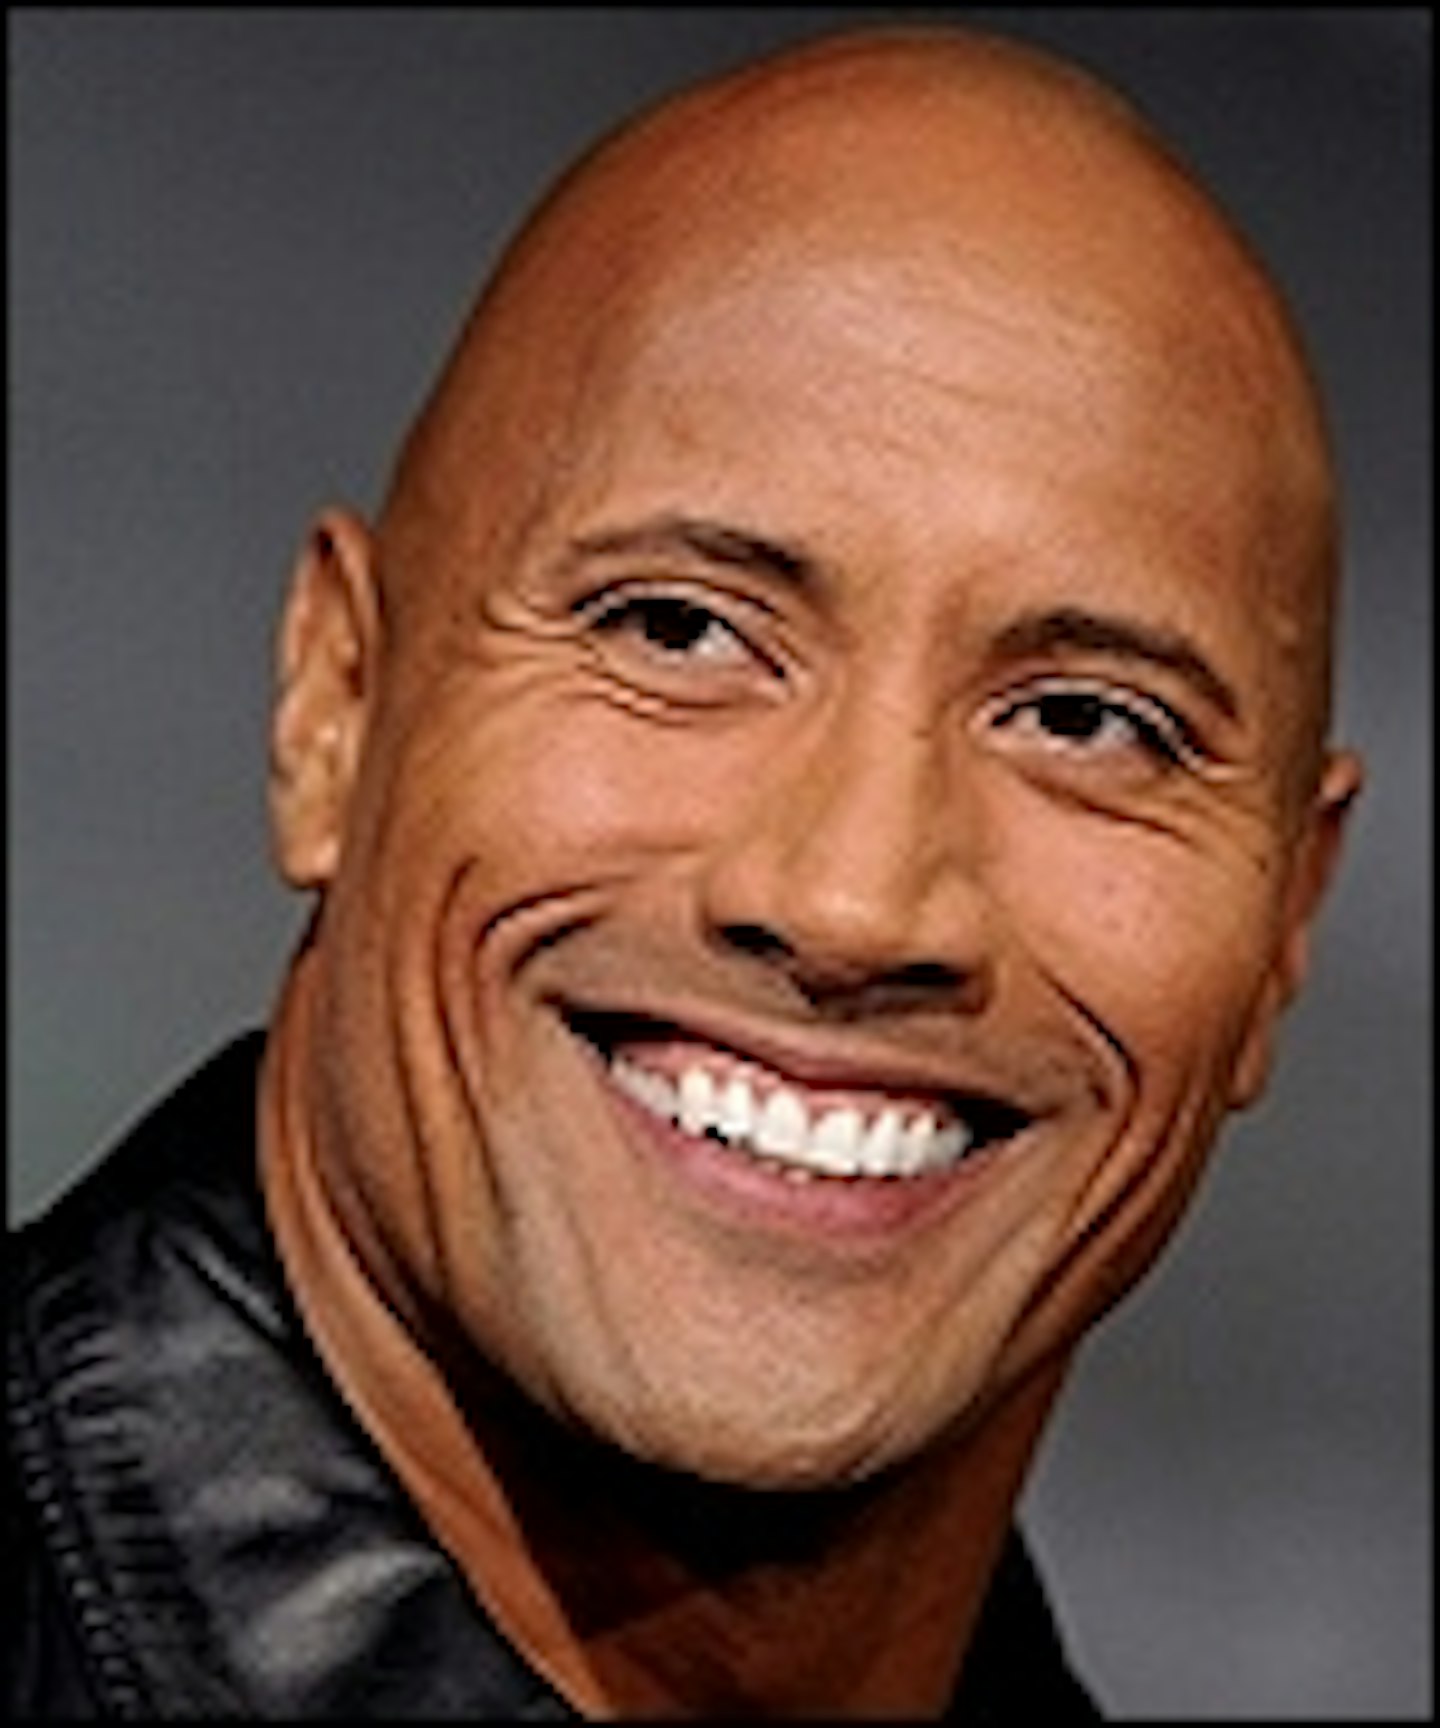 Did The Rock Really Bust Crime?